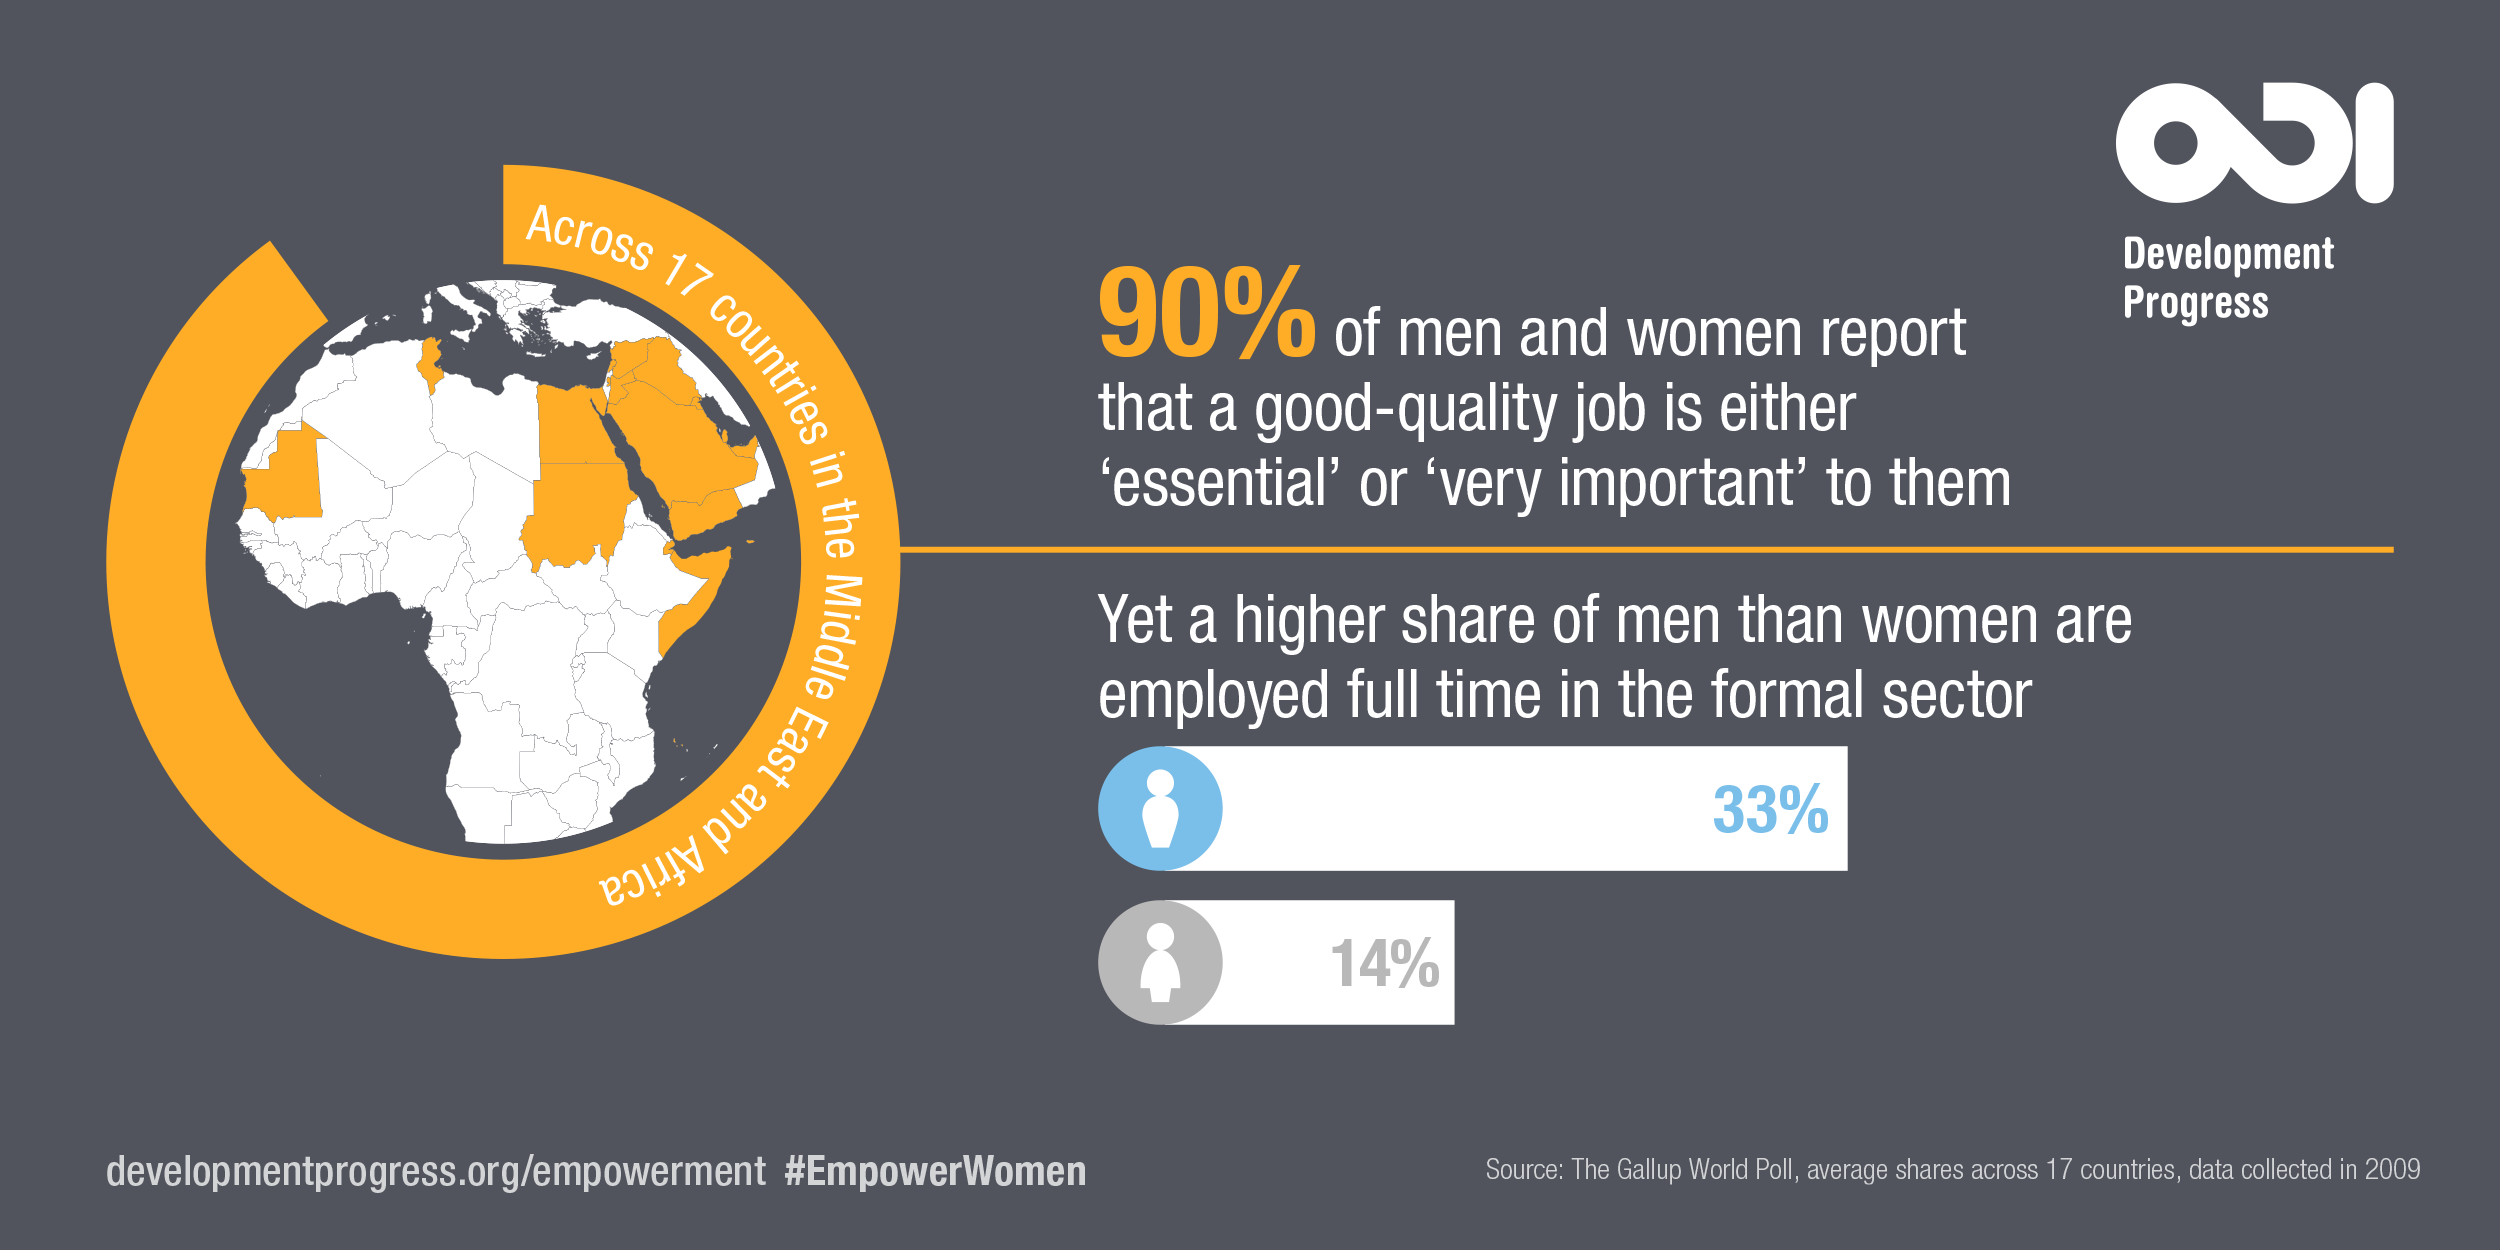 90% of men and women report that a good-quality job is either 'important' or 'very important' to them